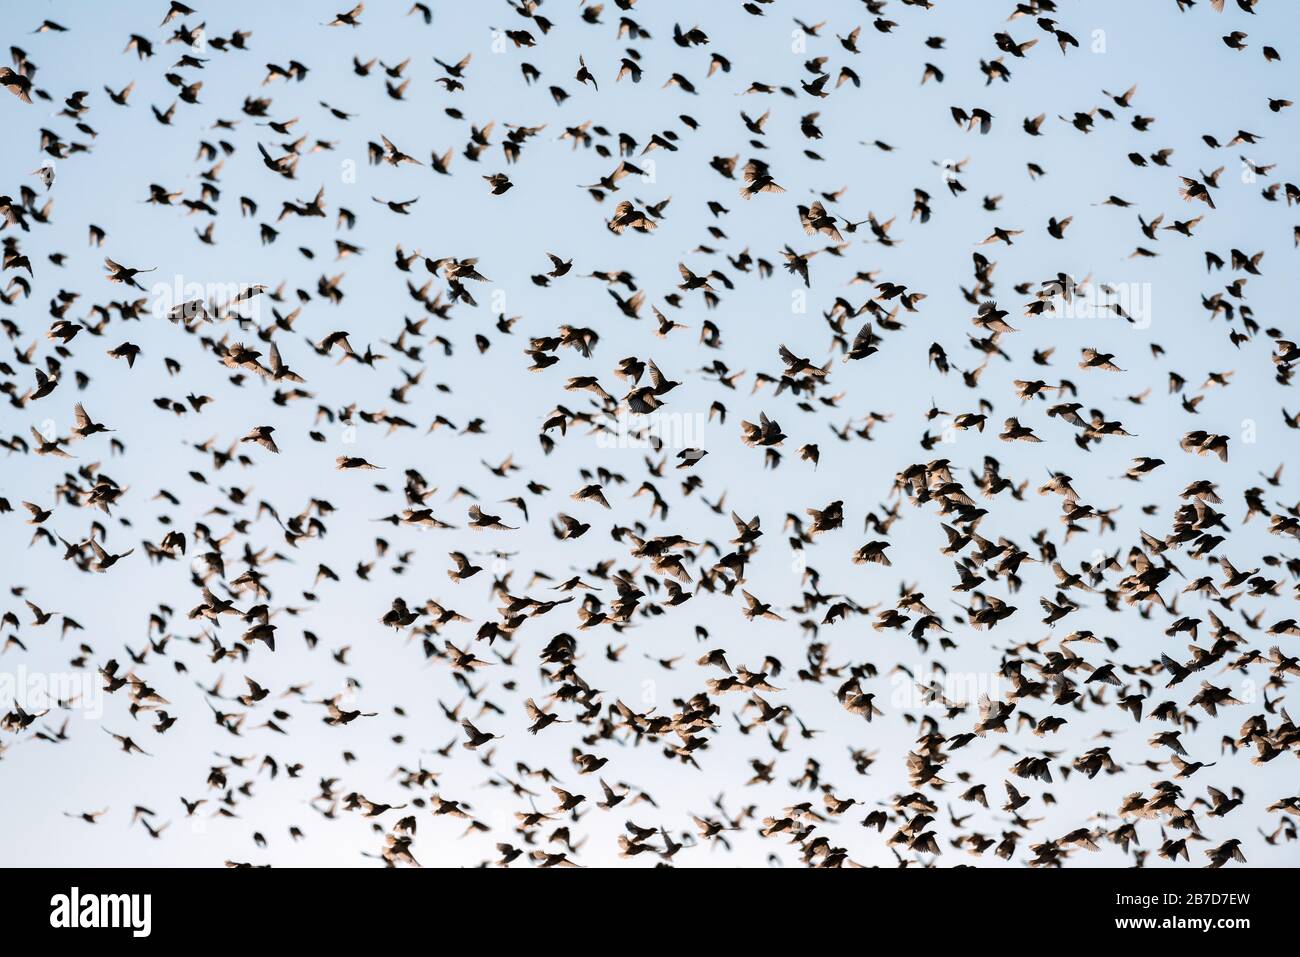 An abstract textured photograph of a big flock of Quelea birds flying against a blue sky at sunset in the Madikwe Game Reserve, South Africa. Stock Photo